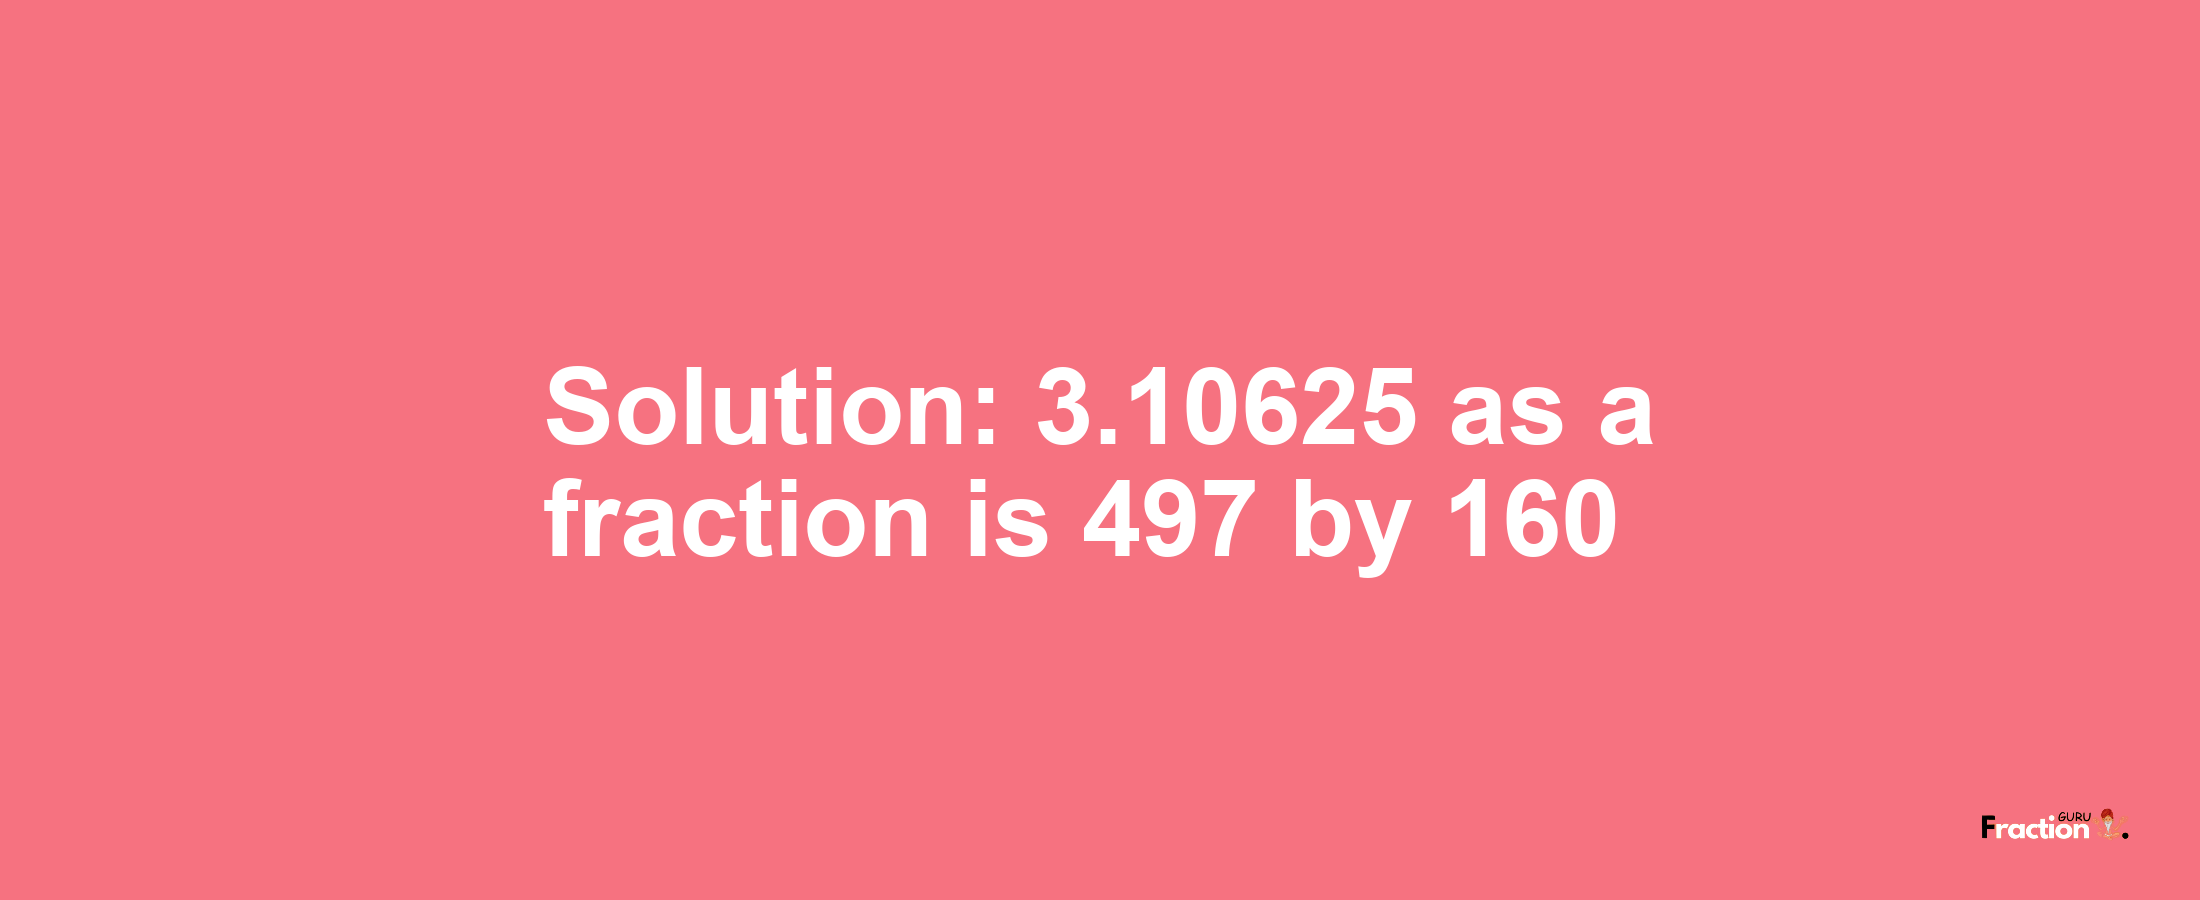 Solution:3.10625 as a fraction is 497/160